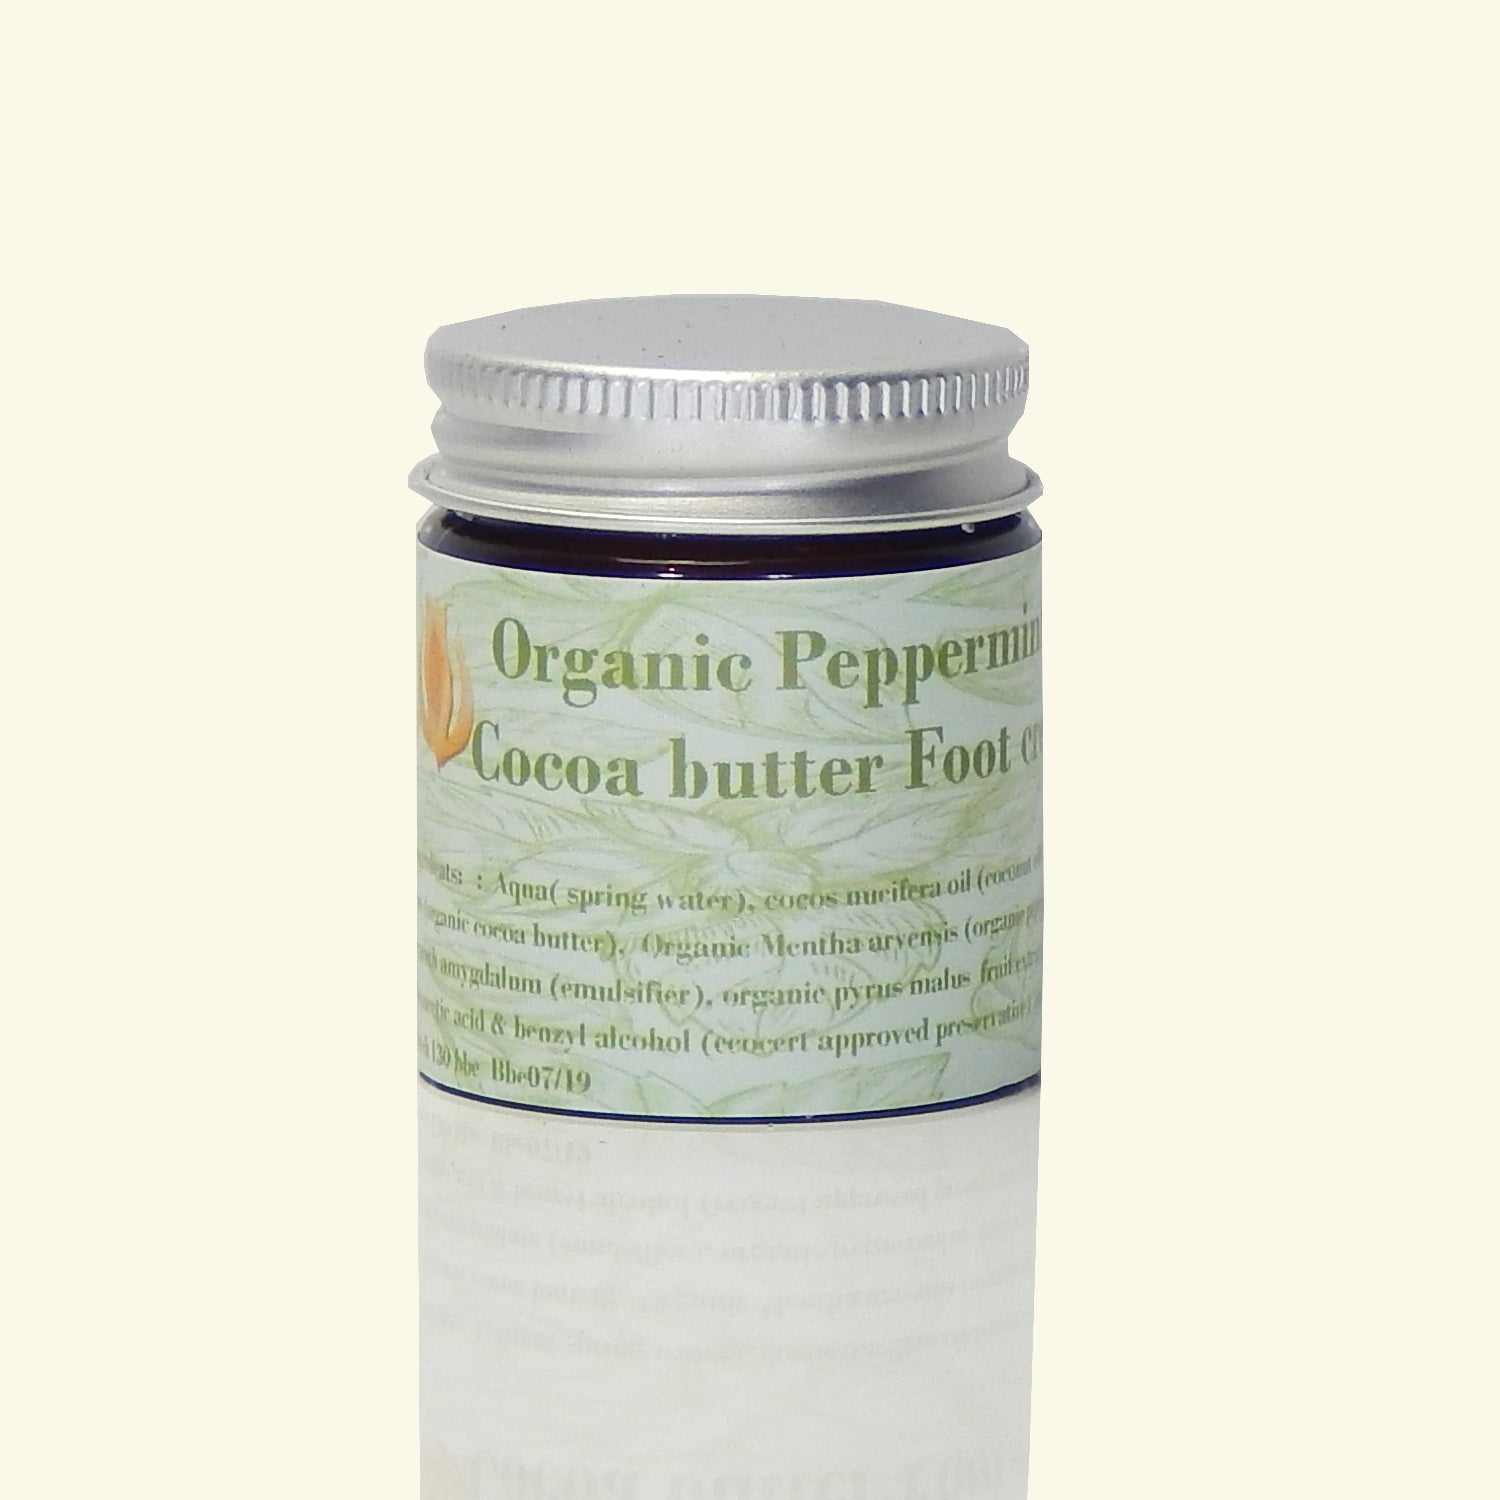 PEPPERMINT & COCOA BUTTER FOOT CREAM